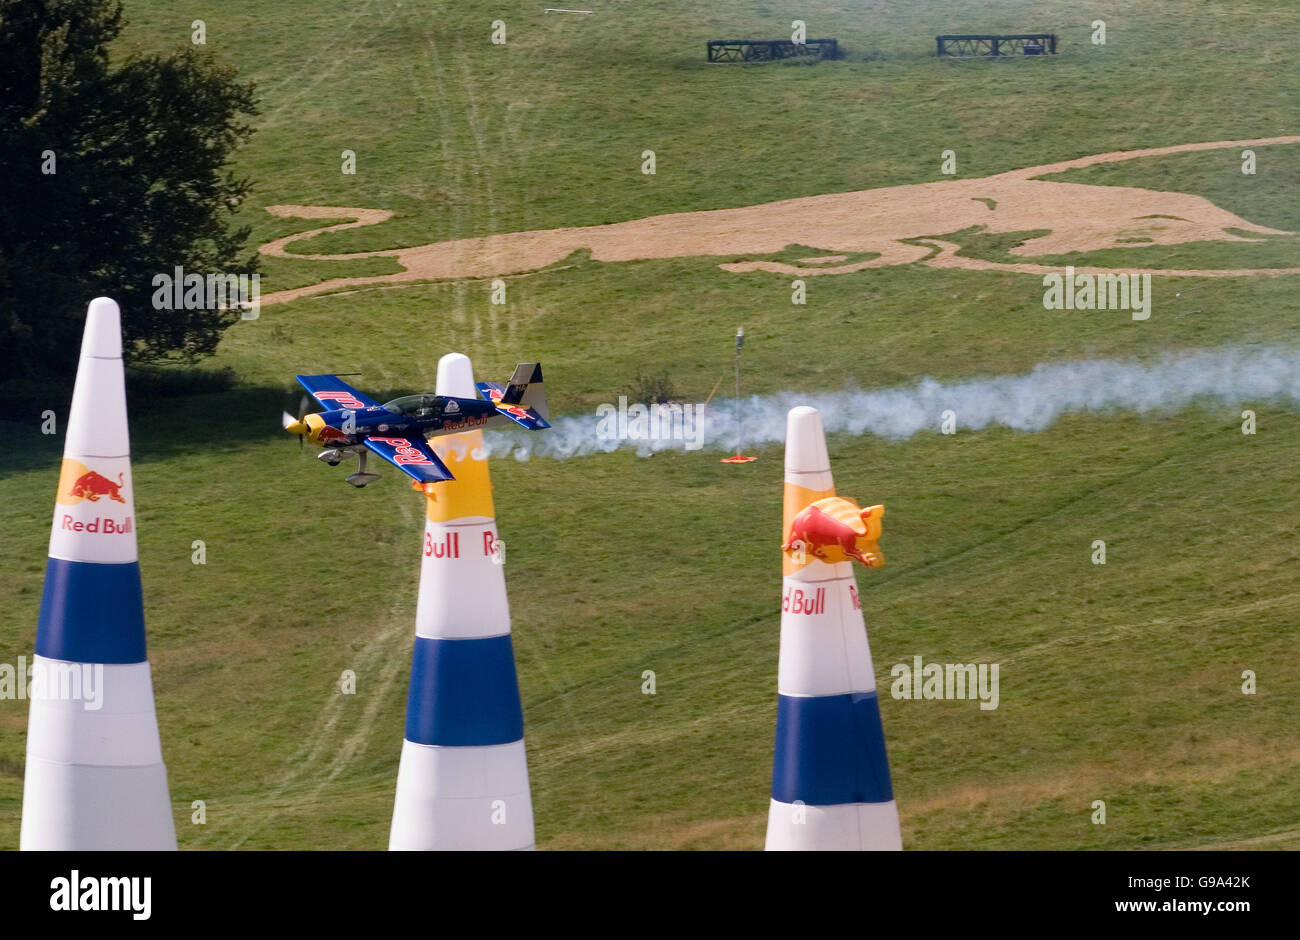 World Champion, Series leader, and founder of the Red Bull air races Peter Besenyei Stock Photo